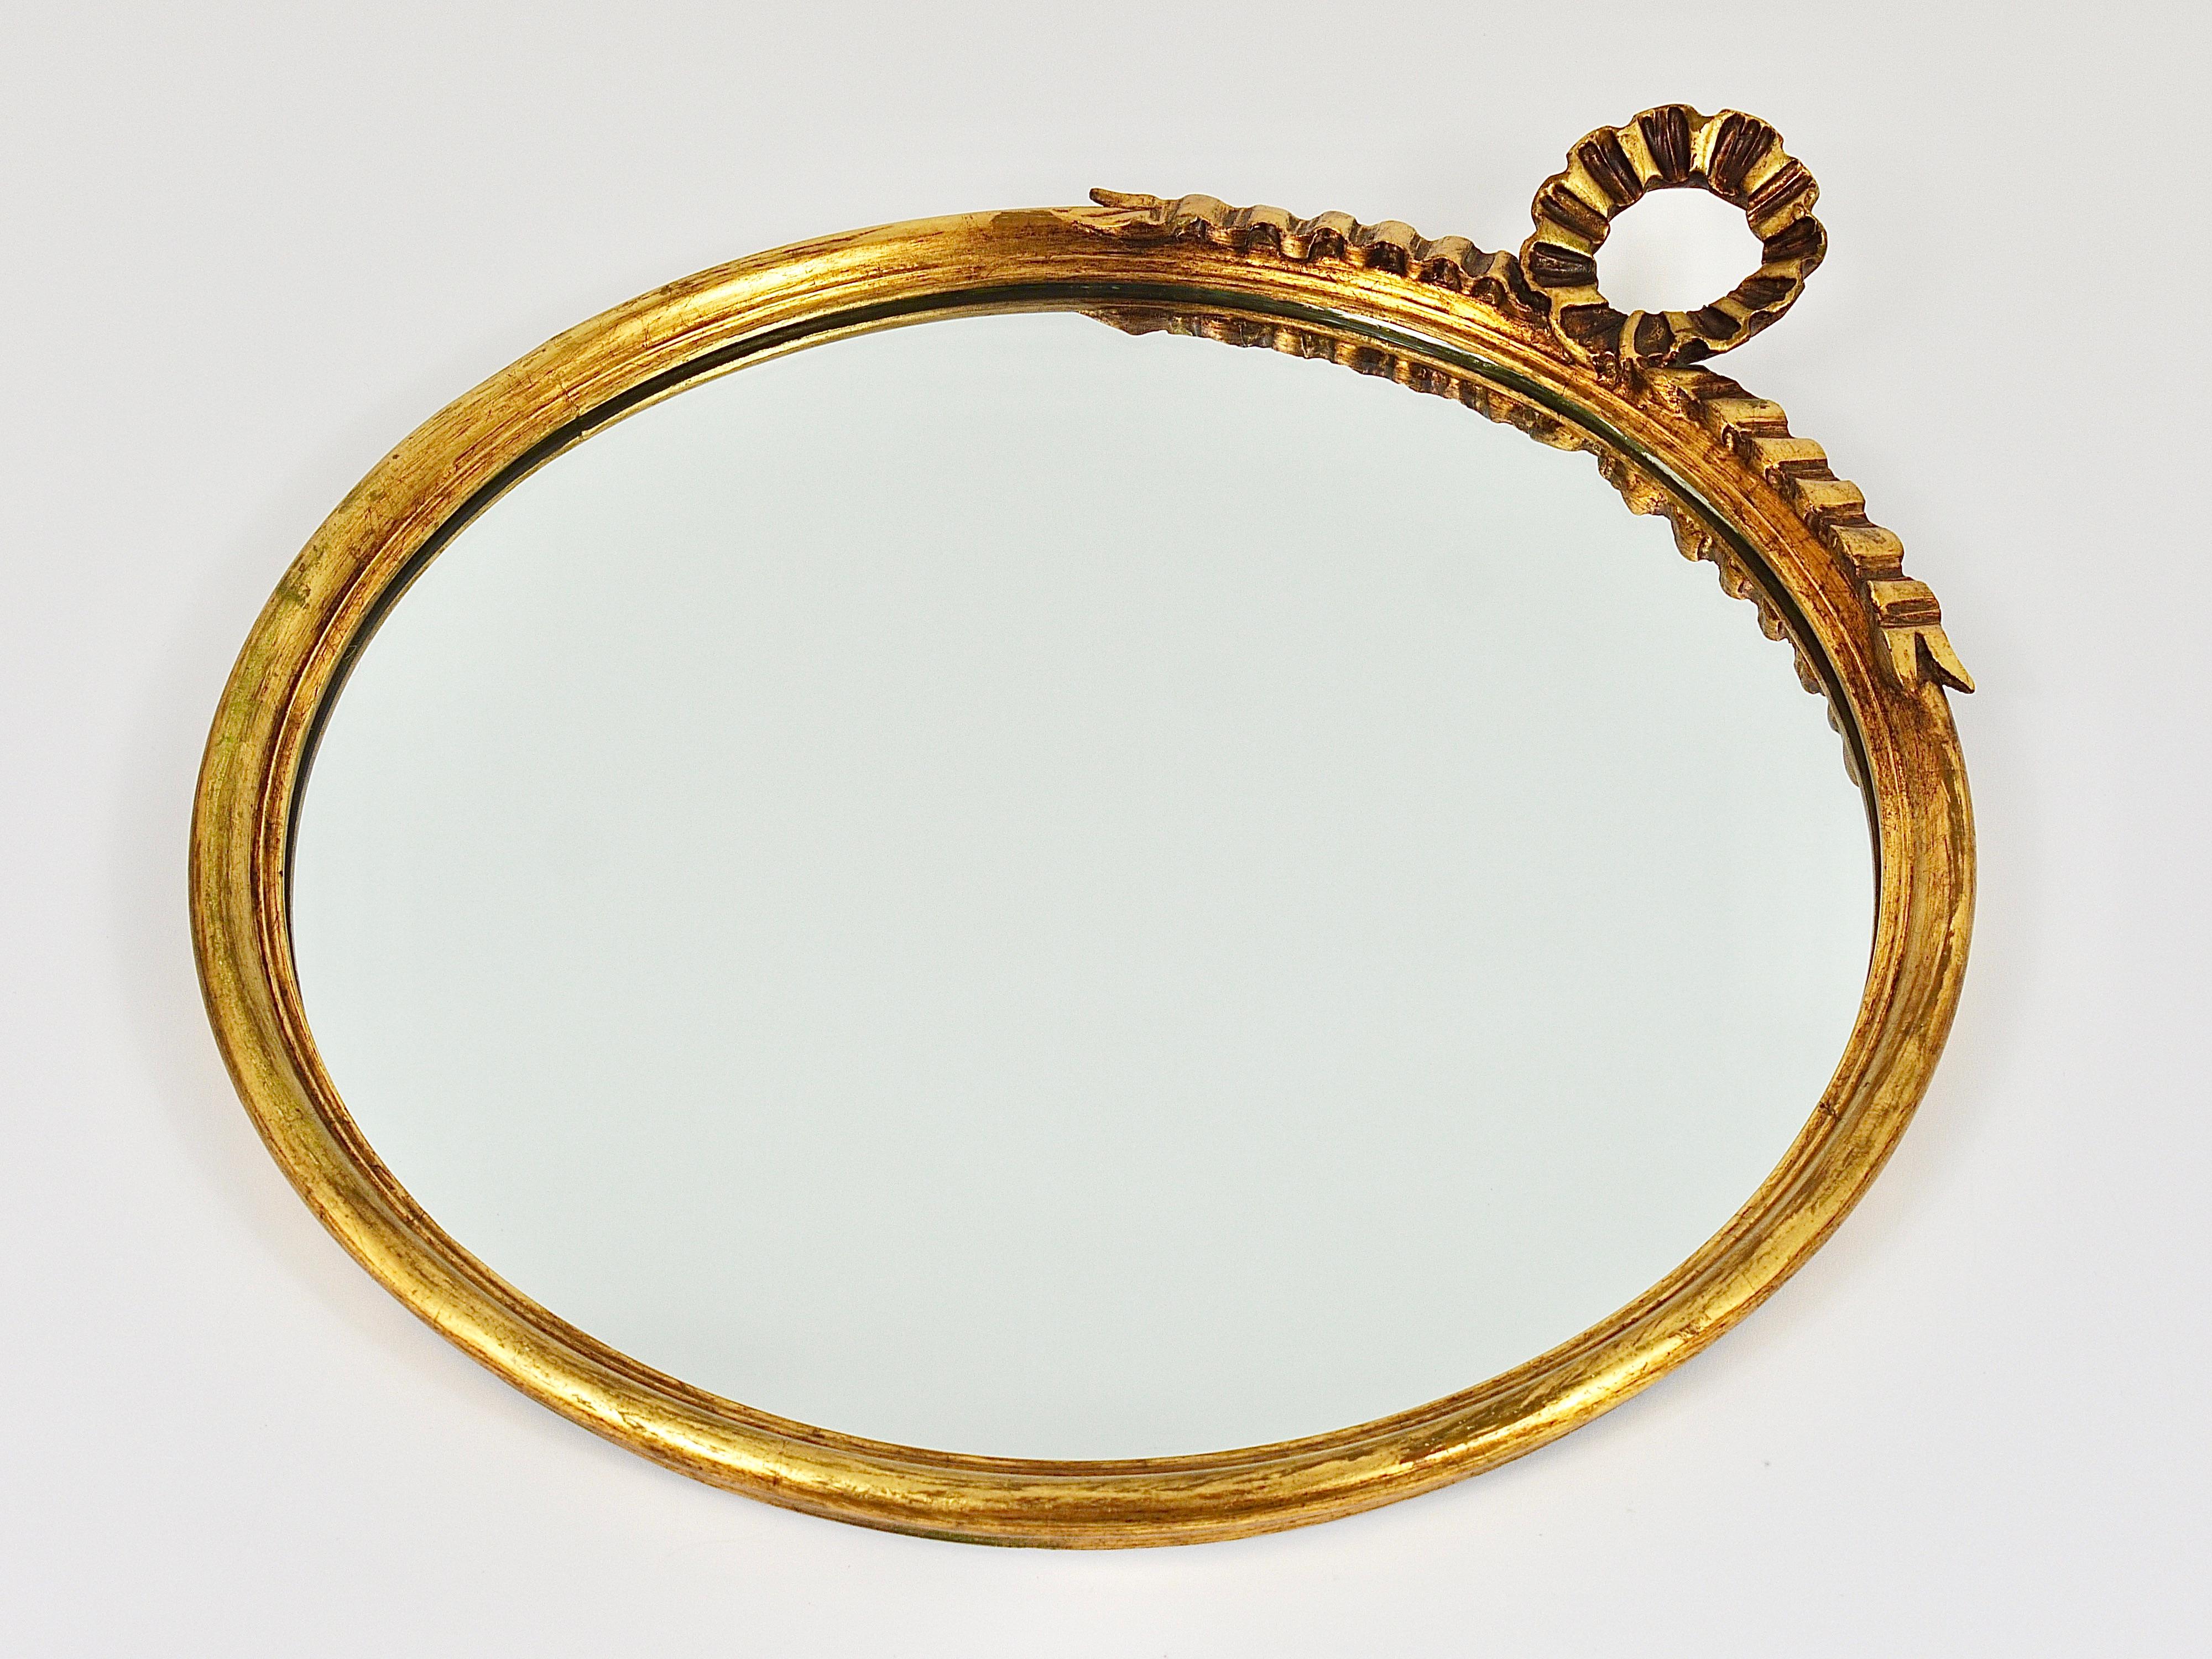 Hand-Carved Round Midcentury Gilt Wood Wall Mirror, C. Allodi & G. Subelli, Italy, 1950s For Sale